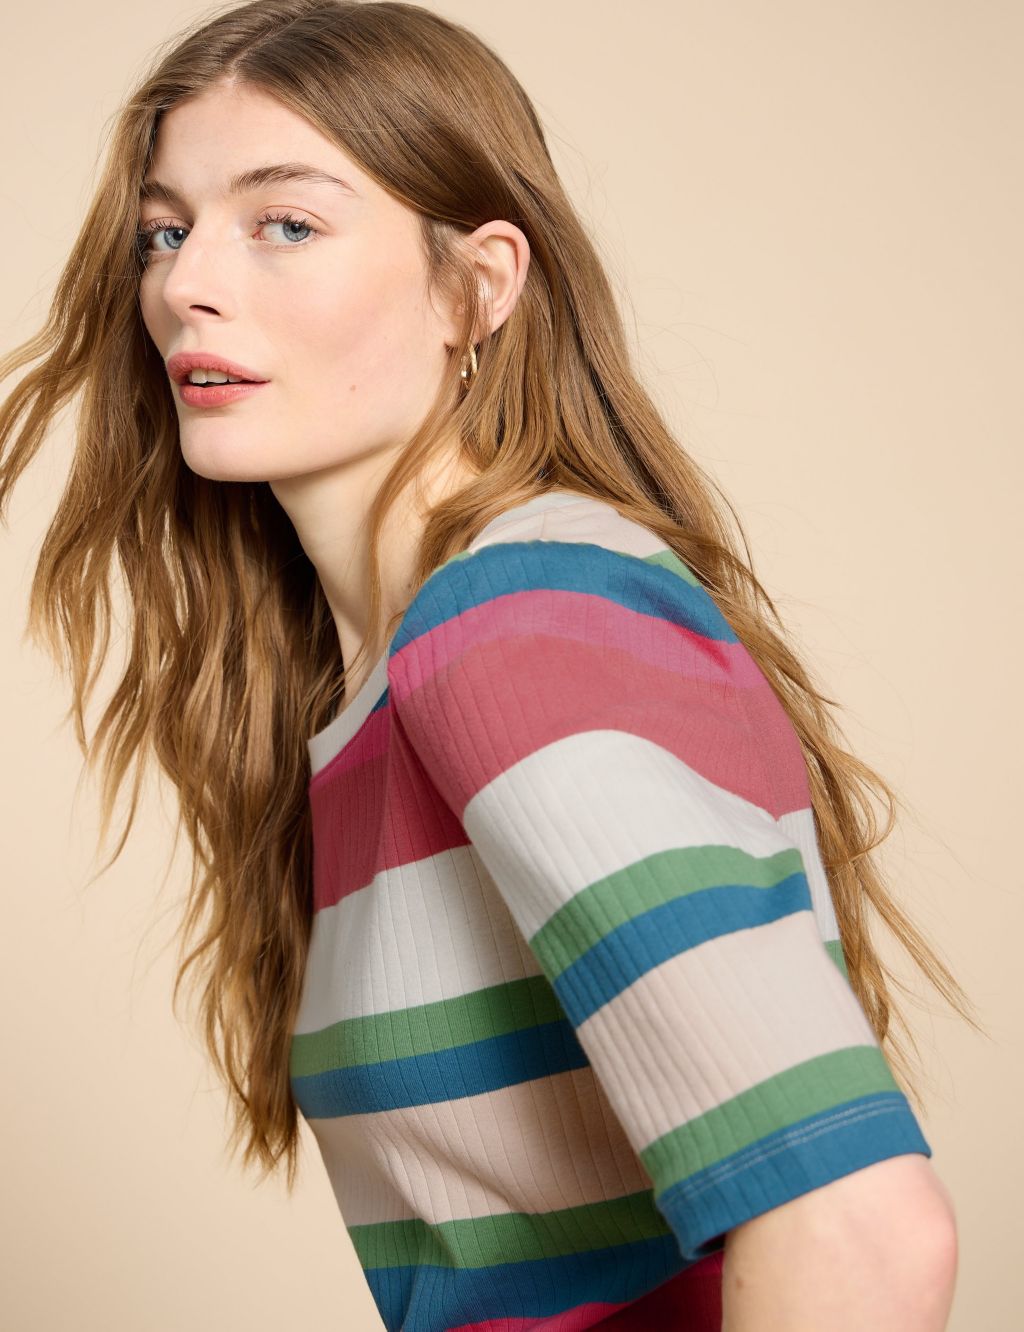 Pure Cotton Striped T-Shirt 4 of 6